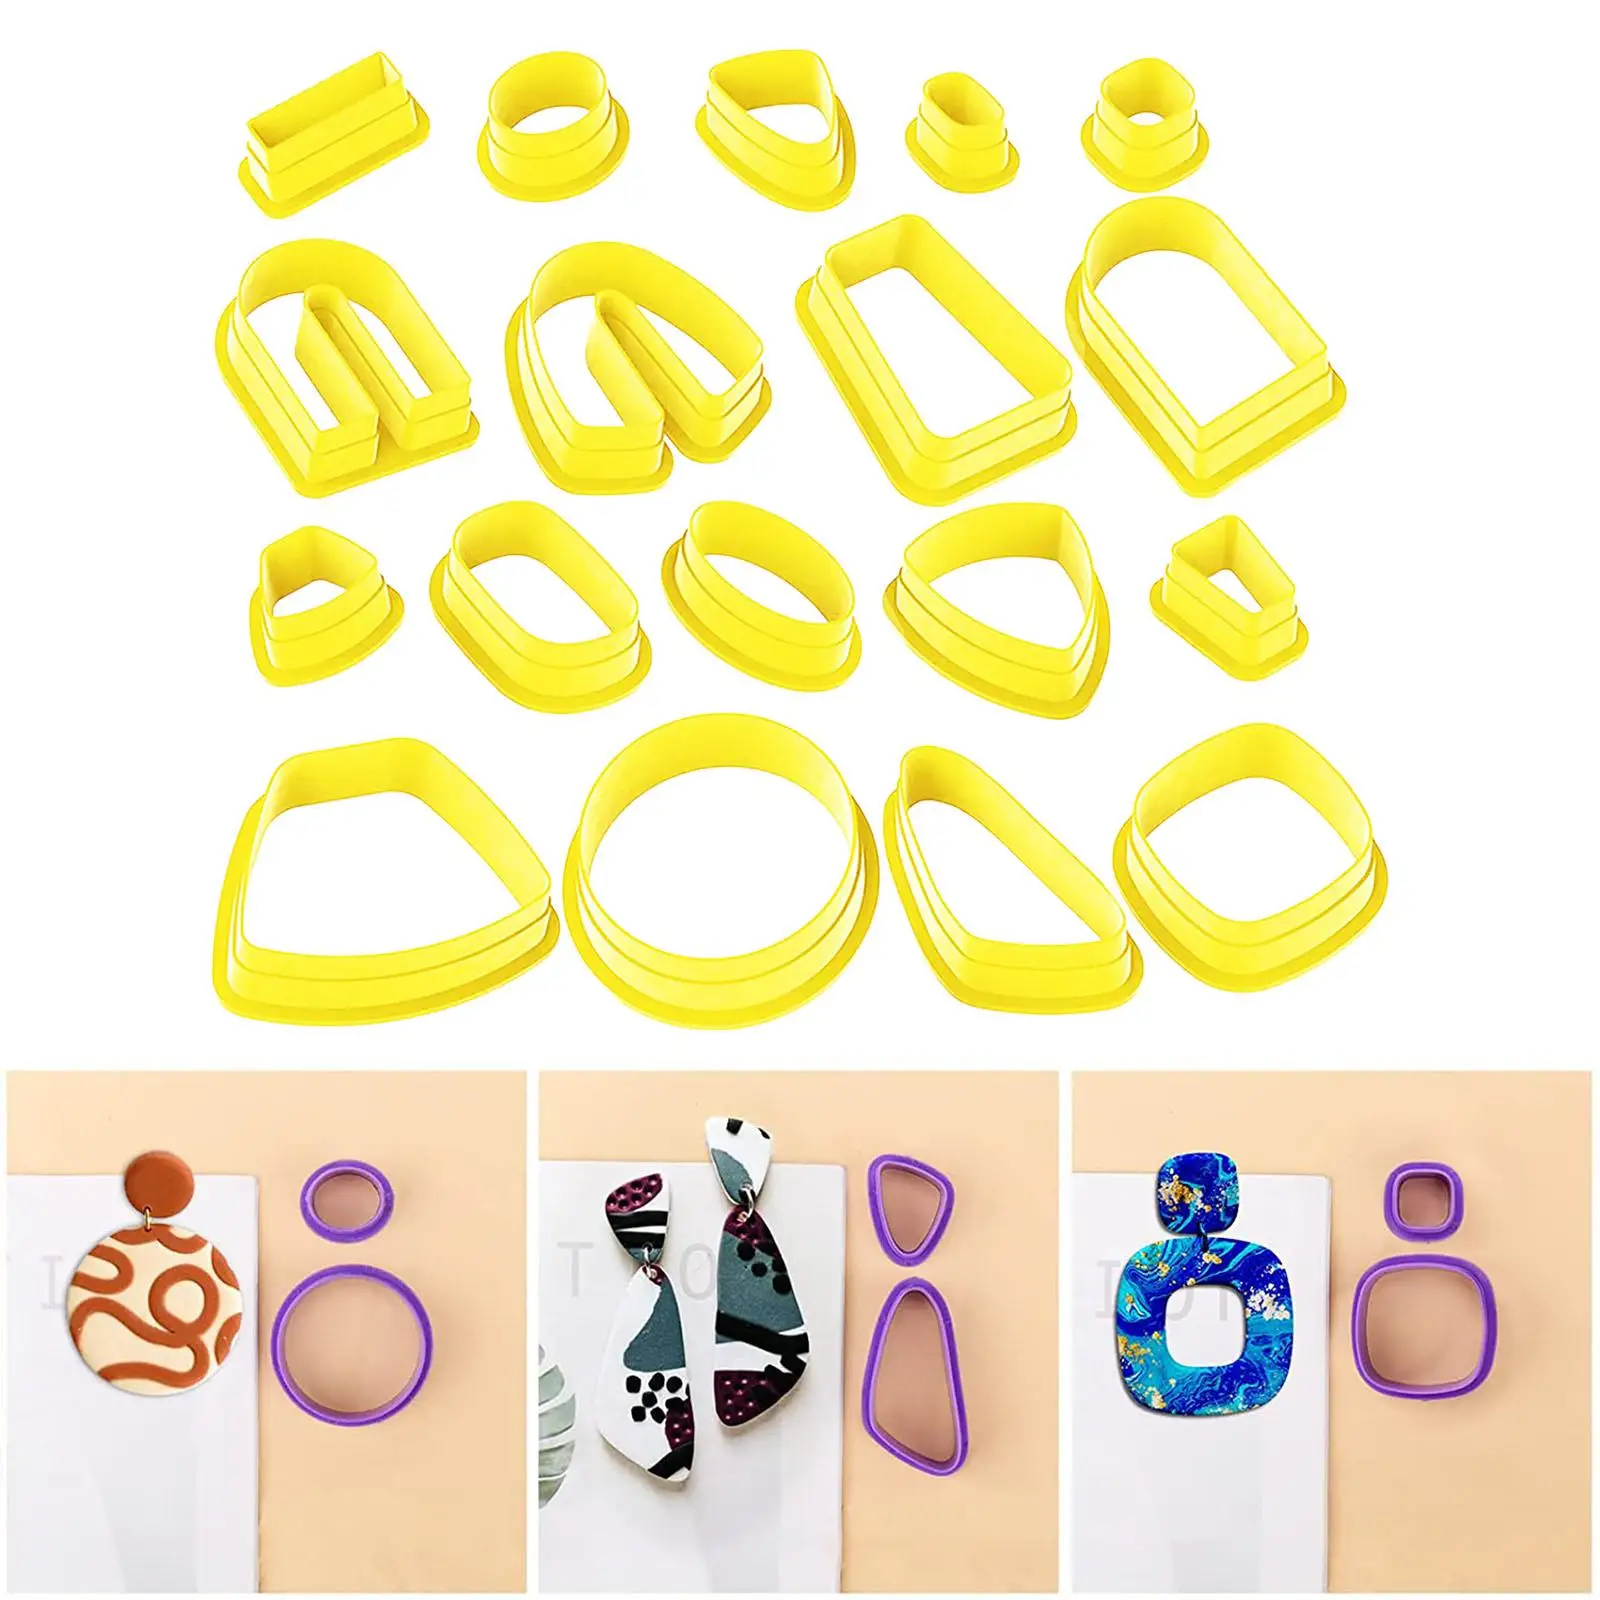 18 Pieces Plastic Polymer Clay Cutters Earring Making Supplies Shapes Art Crafts Kids Polymer Clay Jewelry Clay Cutting Tools